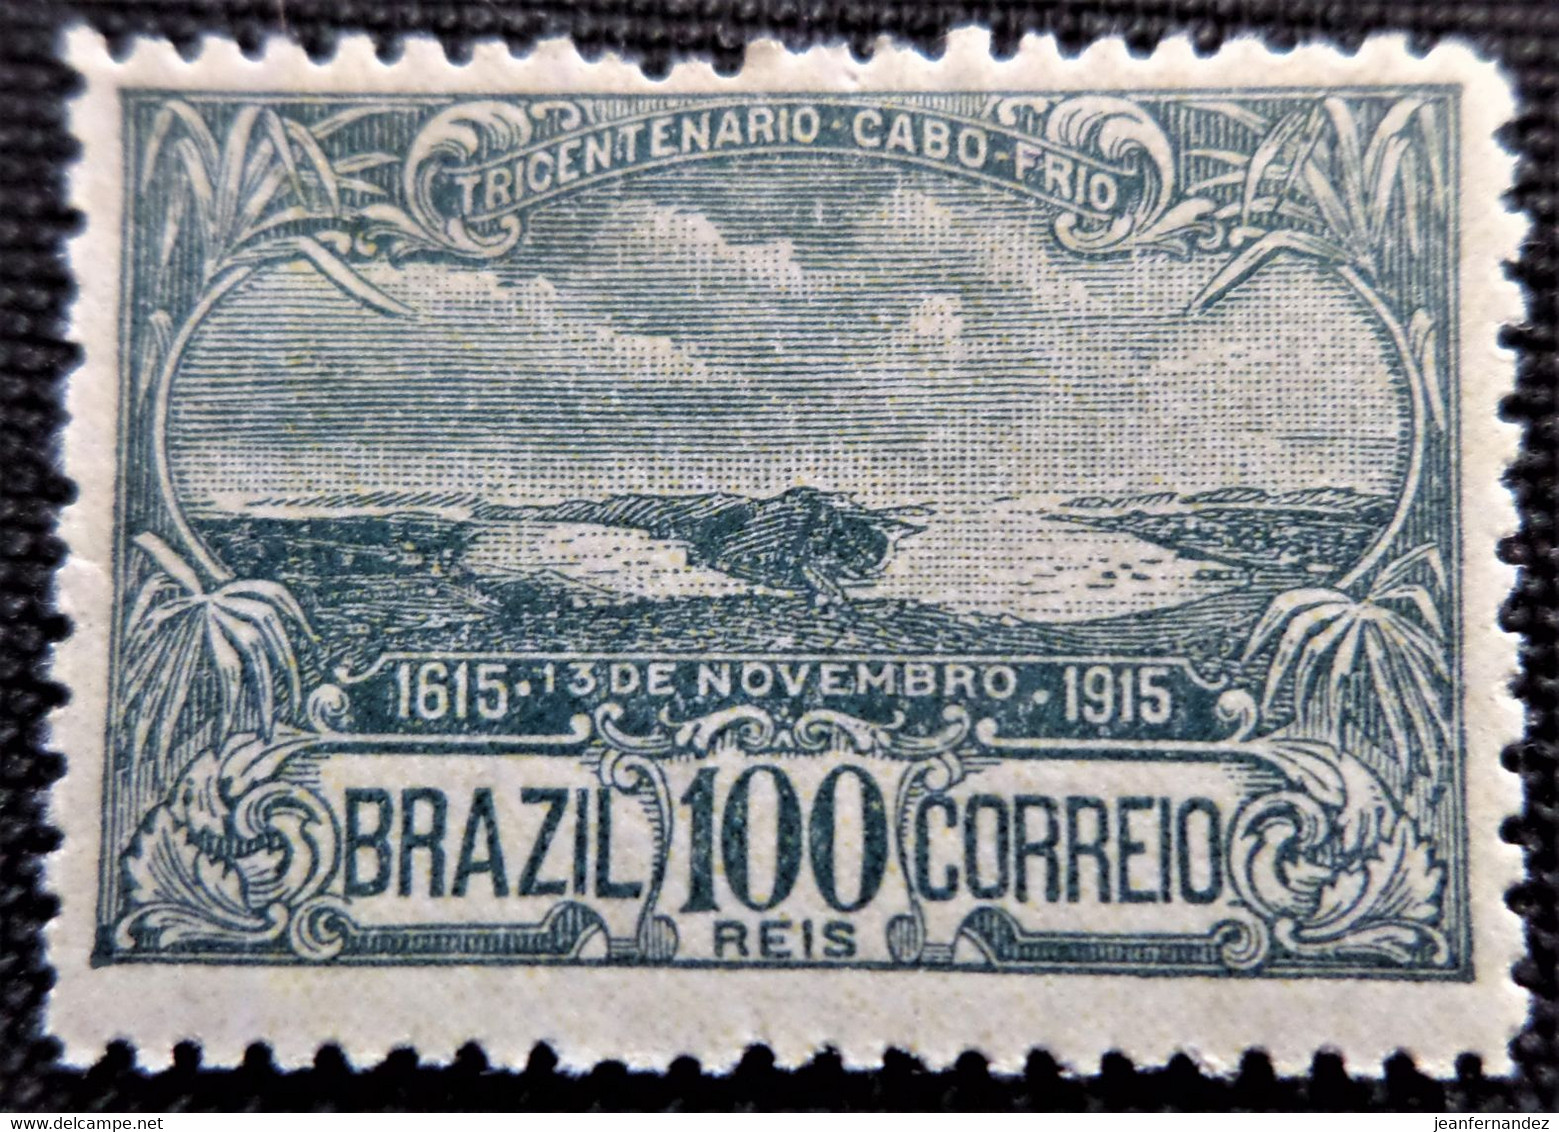 Timbre Du Brésil 1915  300th Anniversary Of The Founding Of Cabo Frio Stampworld N° 197 Neuf Avec Trace De Charnière - Nuovi